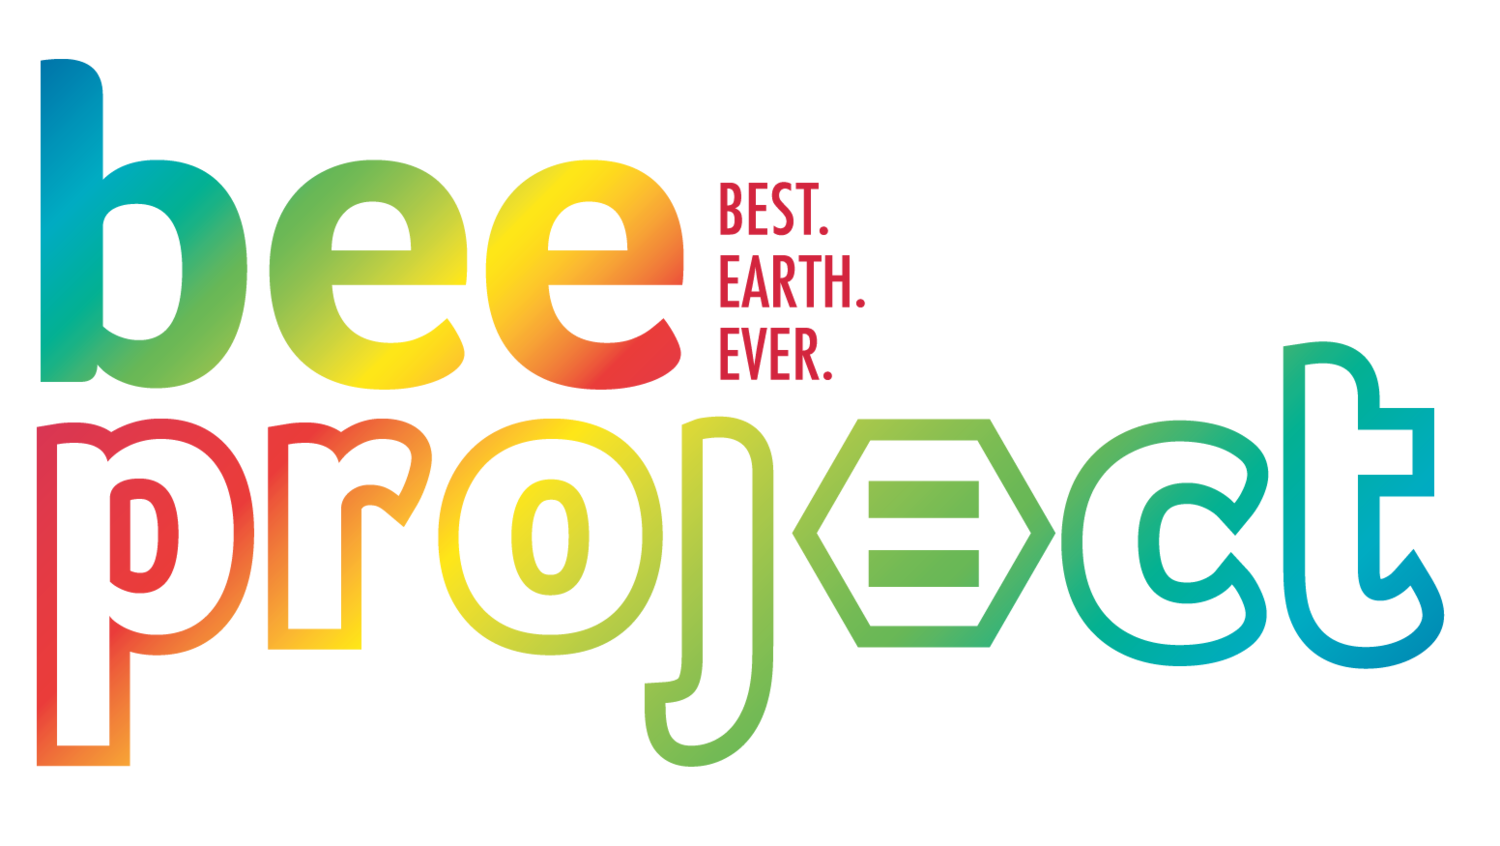 Bee Project